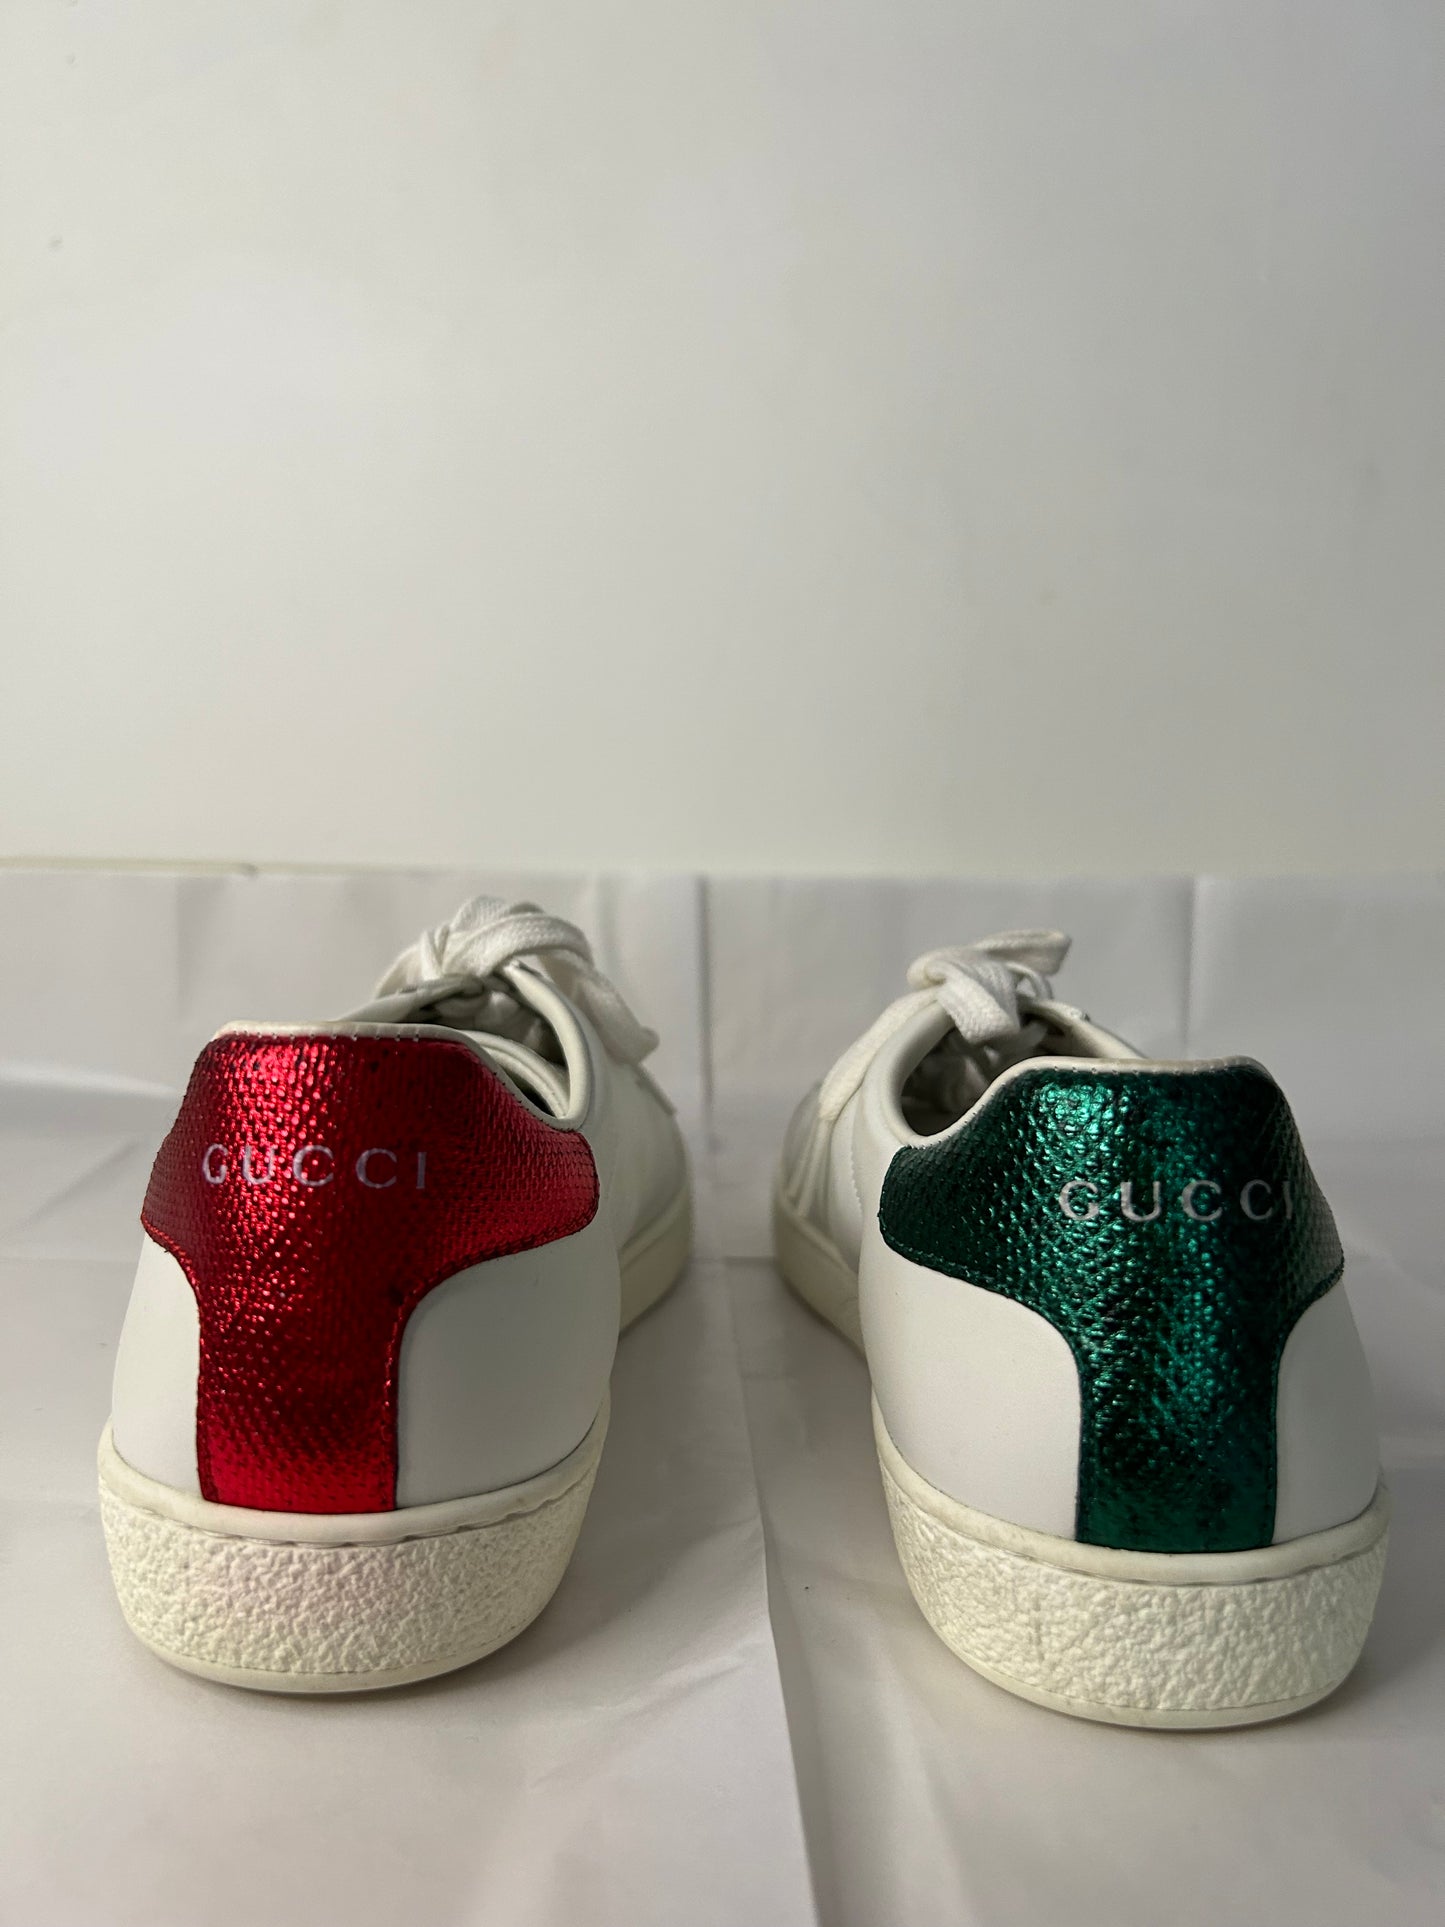 Gucci Lips Studded White Sneakers